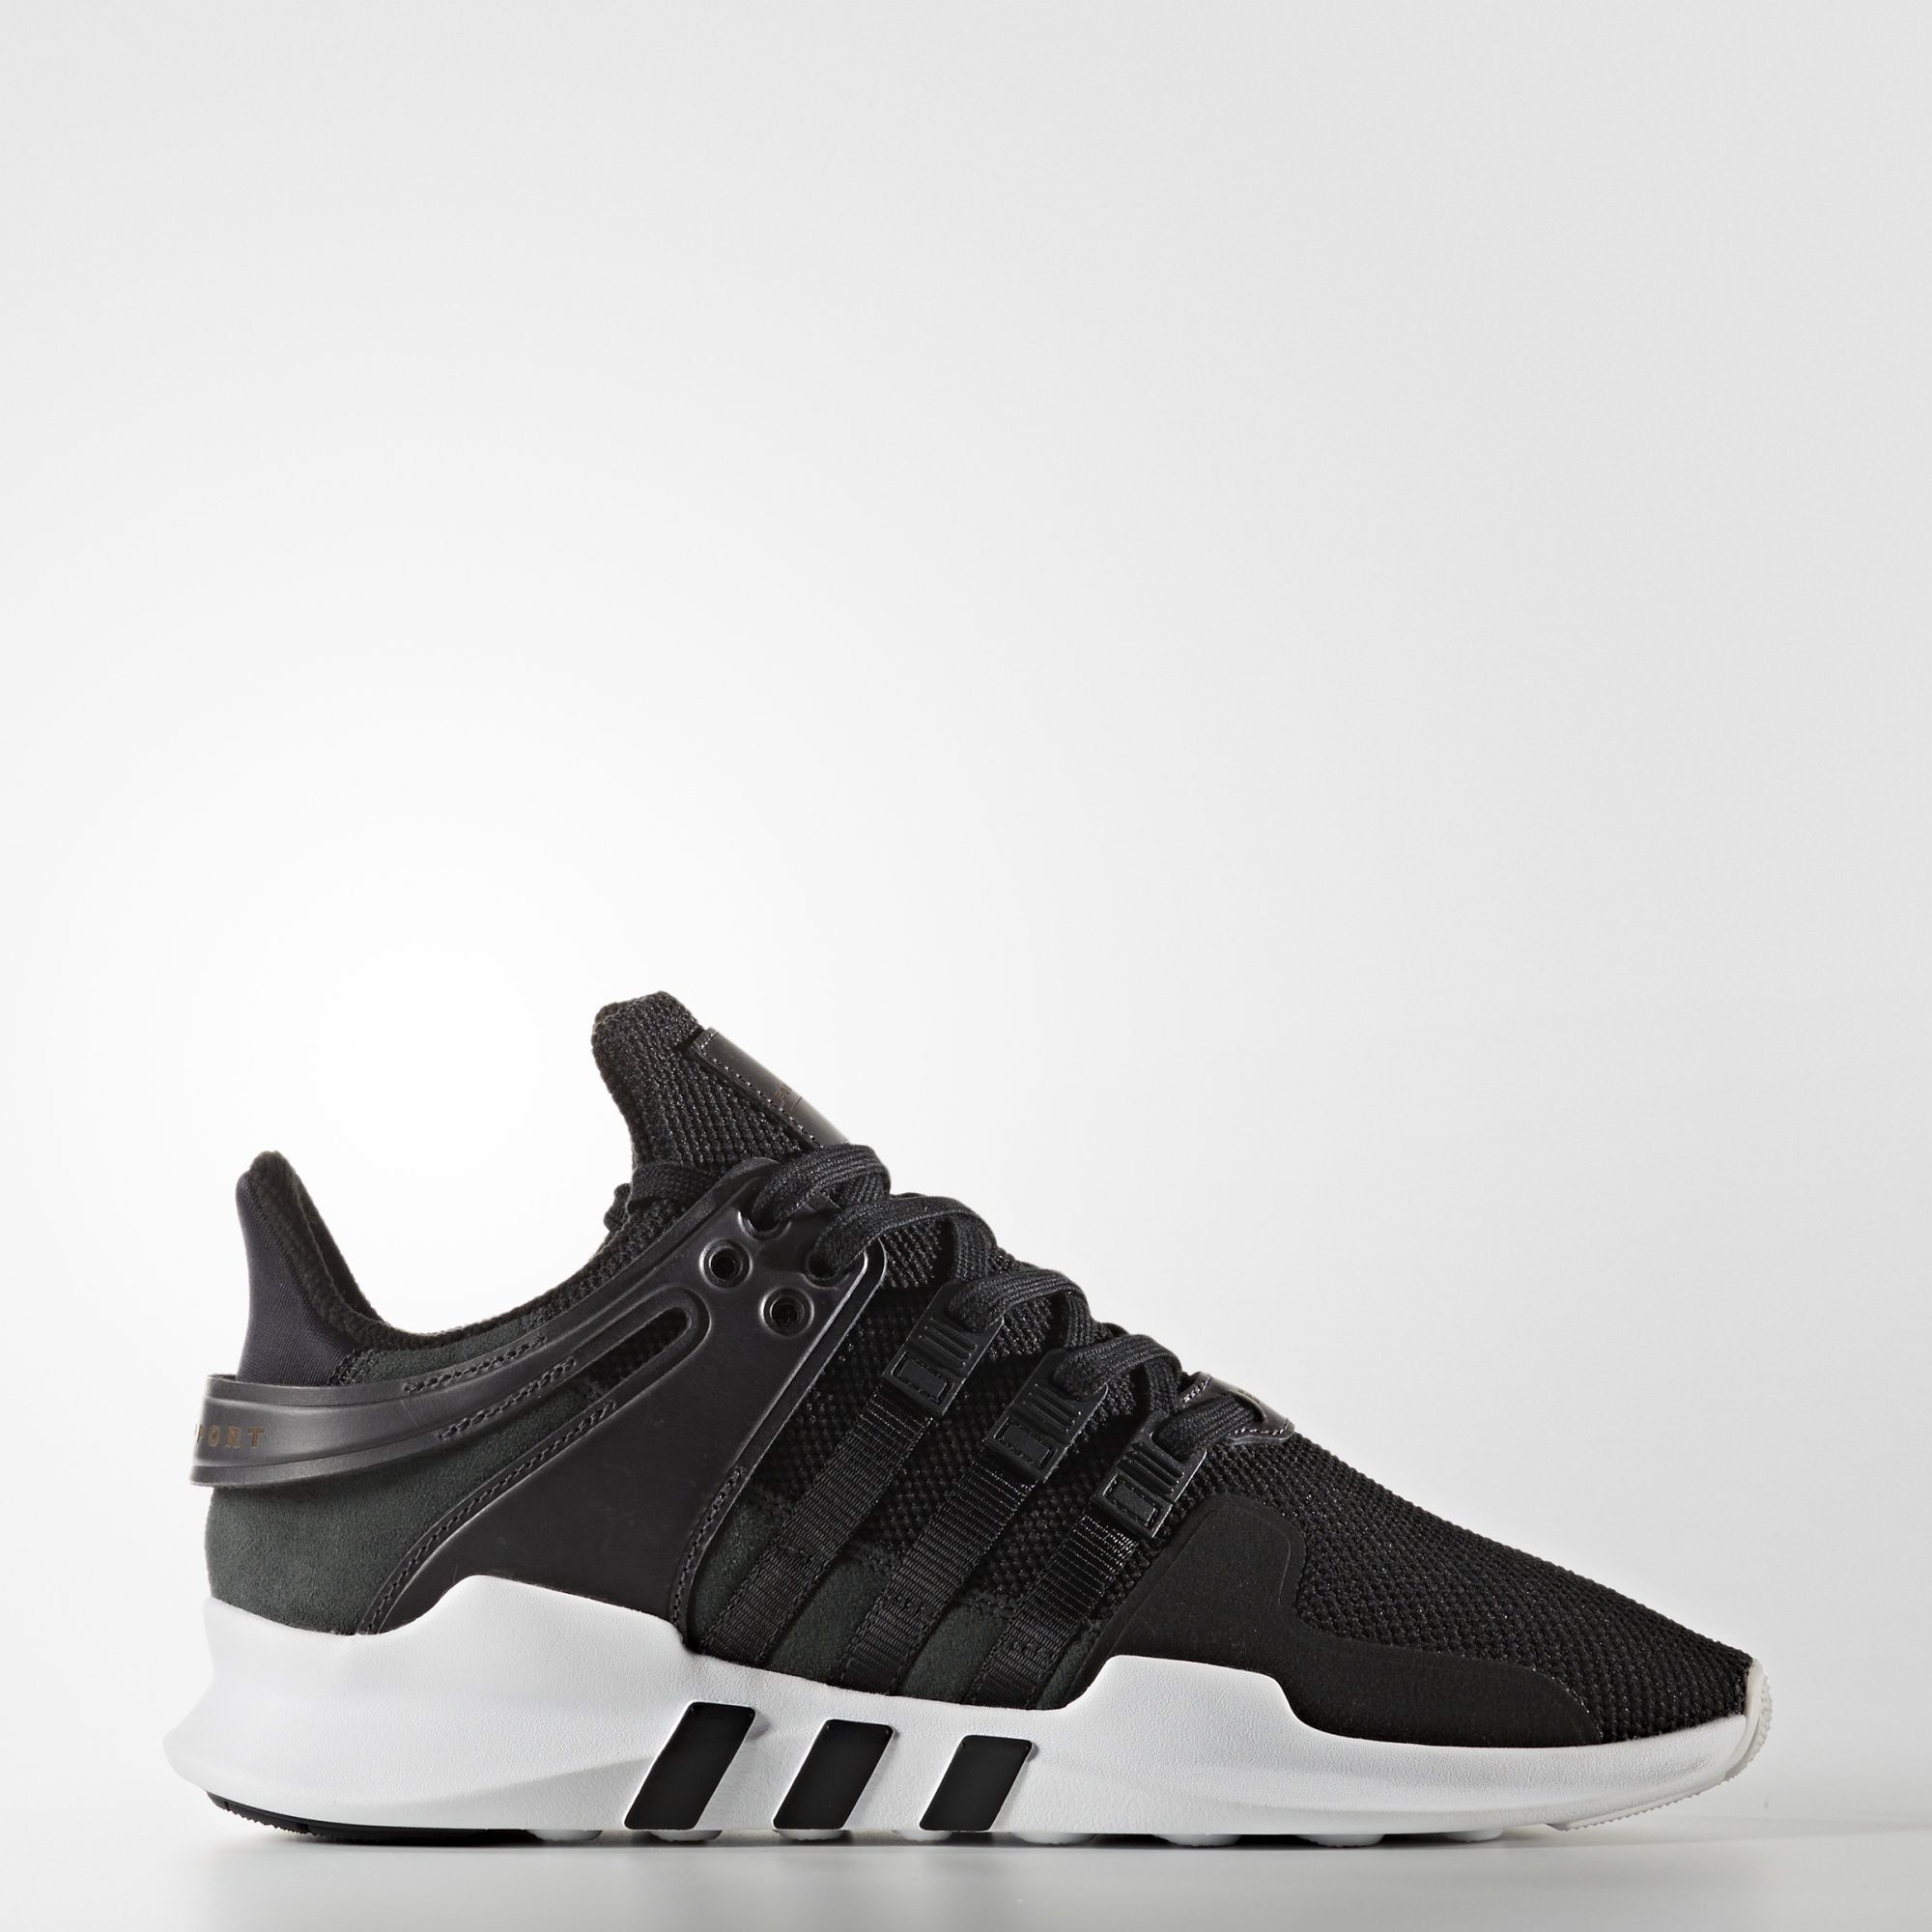 adidas-eqt-support-adv-milled-leather-pack-2